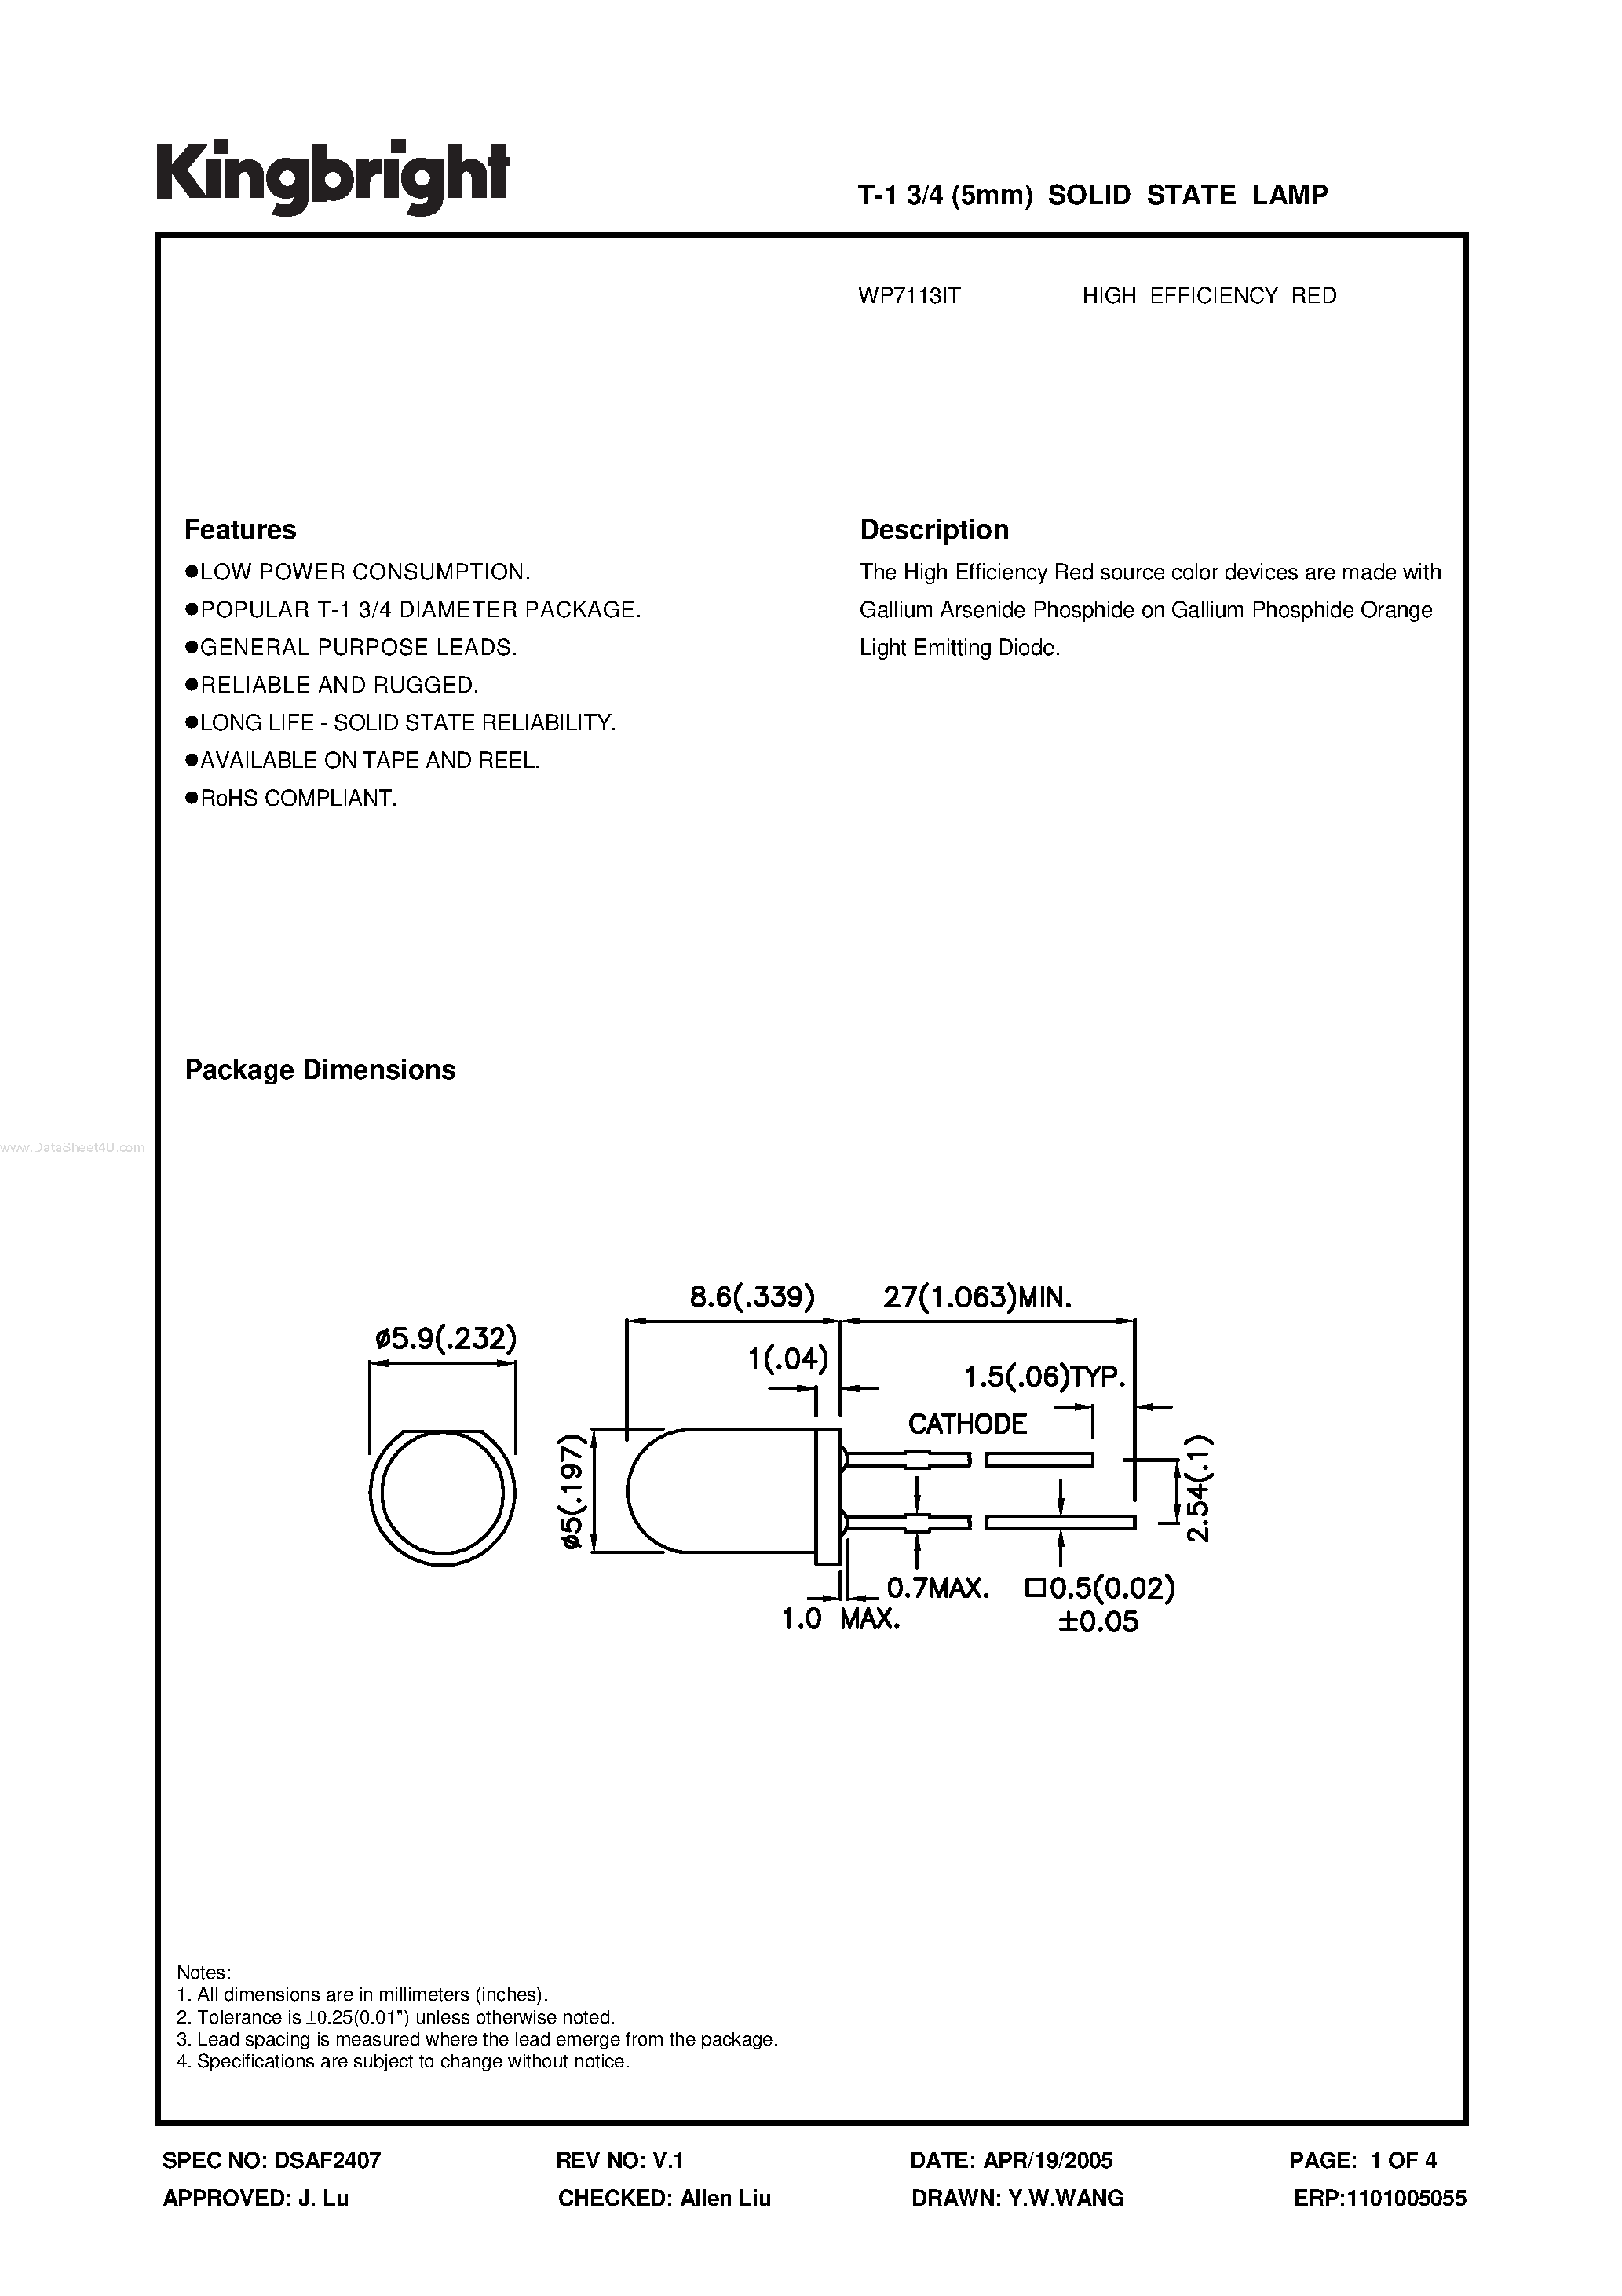 Datasheet WP7113IT - SOLID STATE LAMP page 1